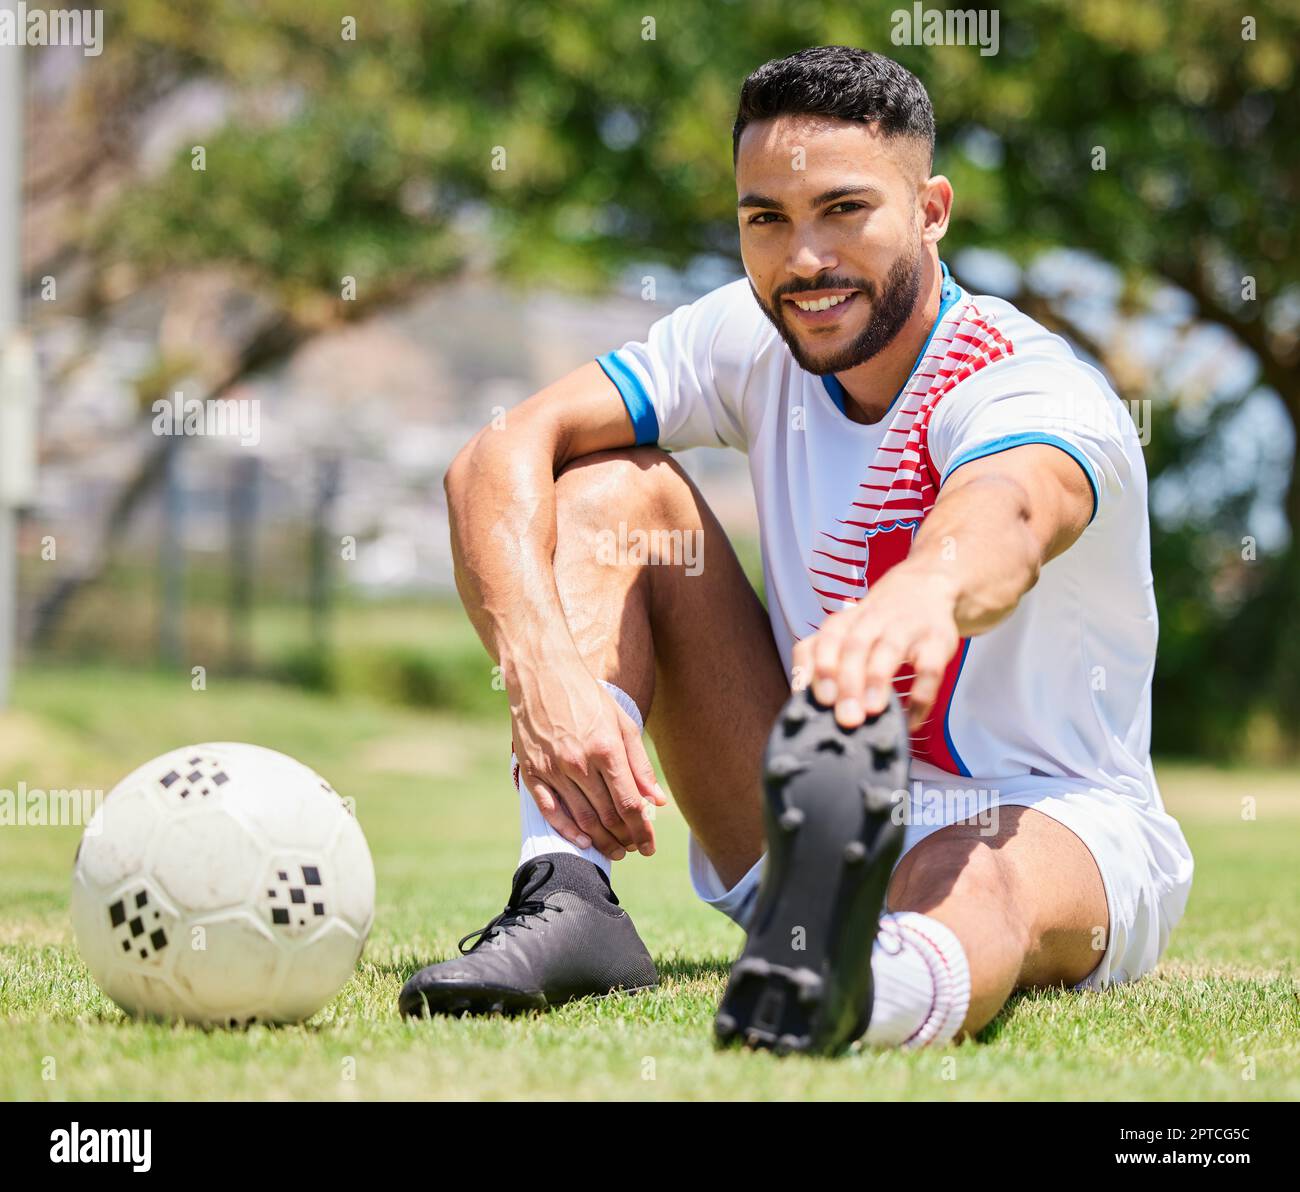 Soccer ball, field and man stretching legs on grass for sport training or  exercise workout. Portrait of young happy athlete, healthy lifestyle  motivat Stock Photo - Alamy